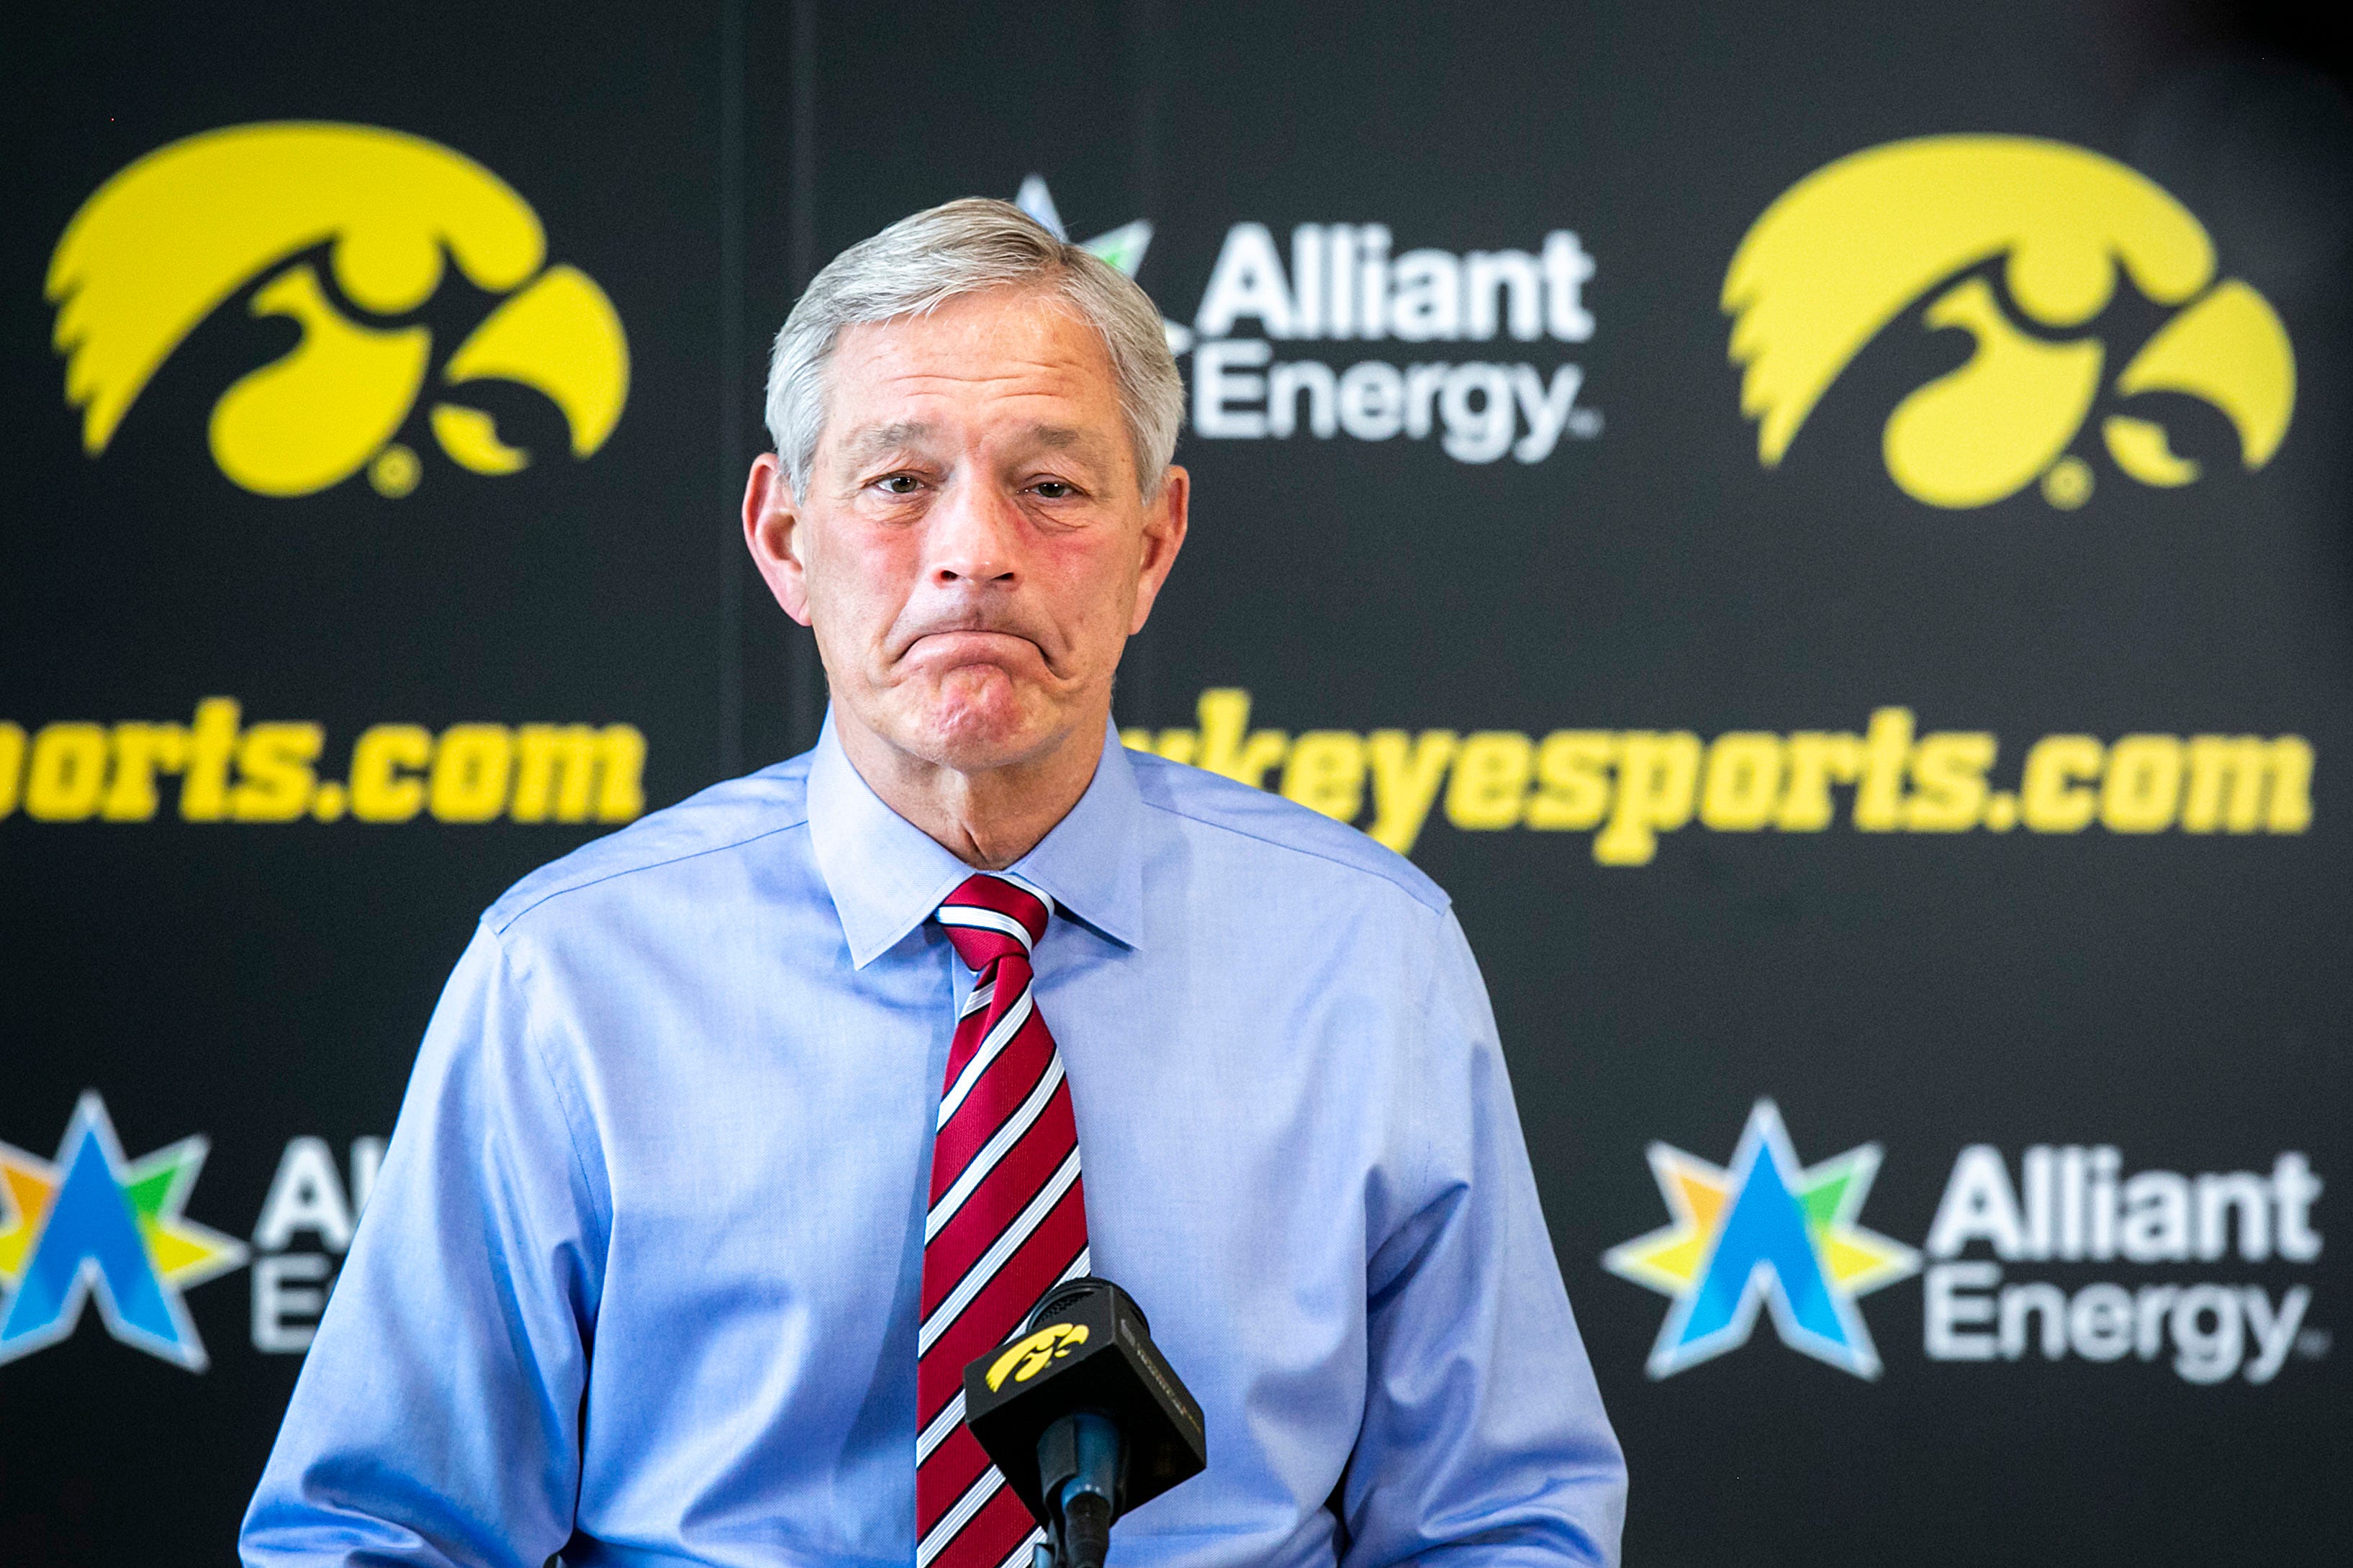 Iowa head coach Kirk Ferentz gets emotional while speaking to reporters during a news conference ahead of the Big Ten Championship football game, Tuesday, Nov. 30, 2021, at the Hansen Football Performance Center in Iowa City, Iowa.